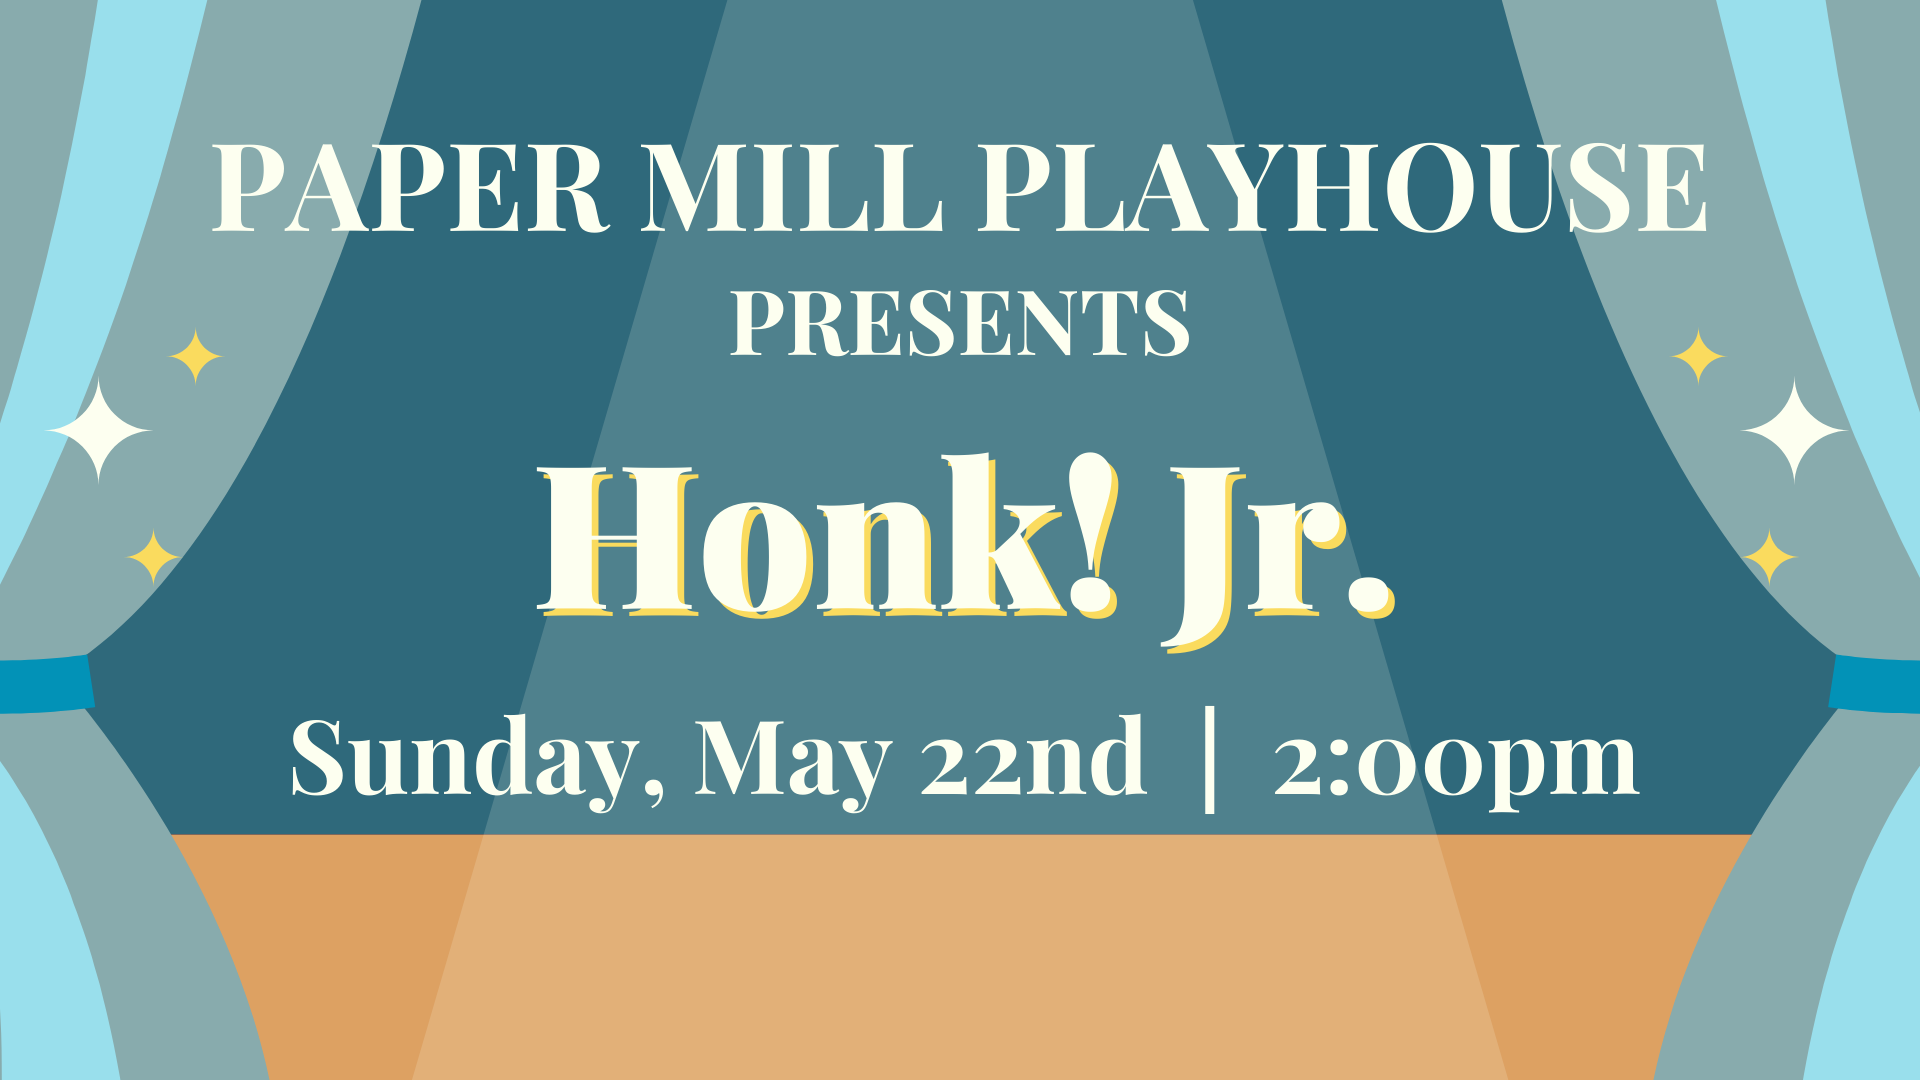 blue stage curtains surrounding cream text that reads Paper Mill Playhouse presents Honk Junior